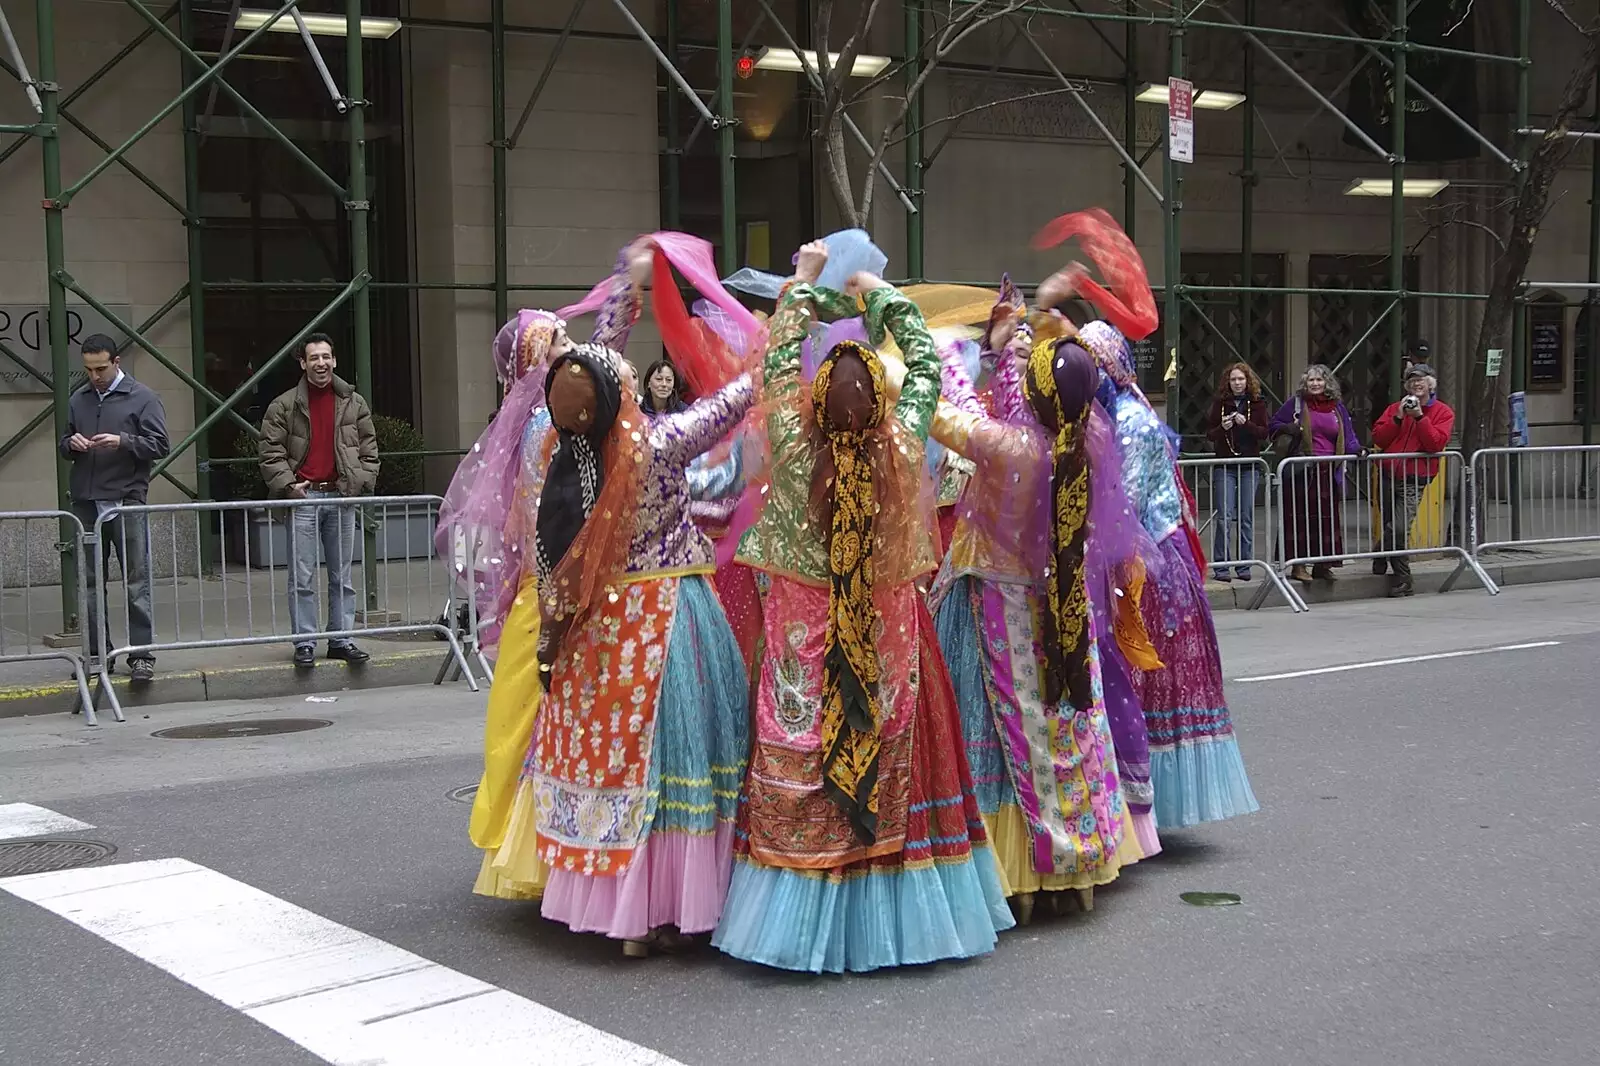 The dancers huddle up, from Persian Day Parade, Upper East Side and Midtown, New York, US - 25th March 2007